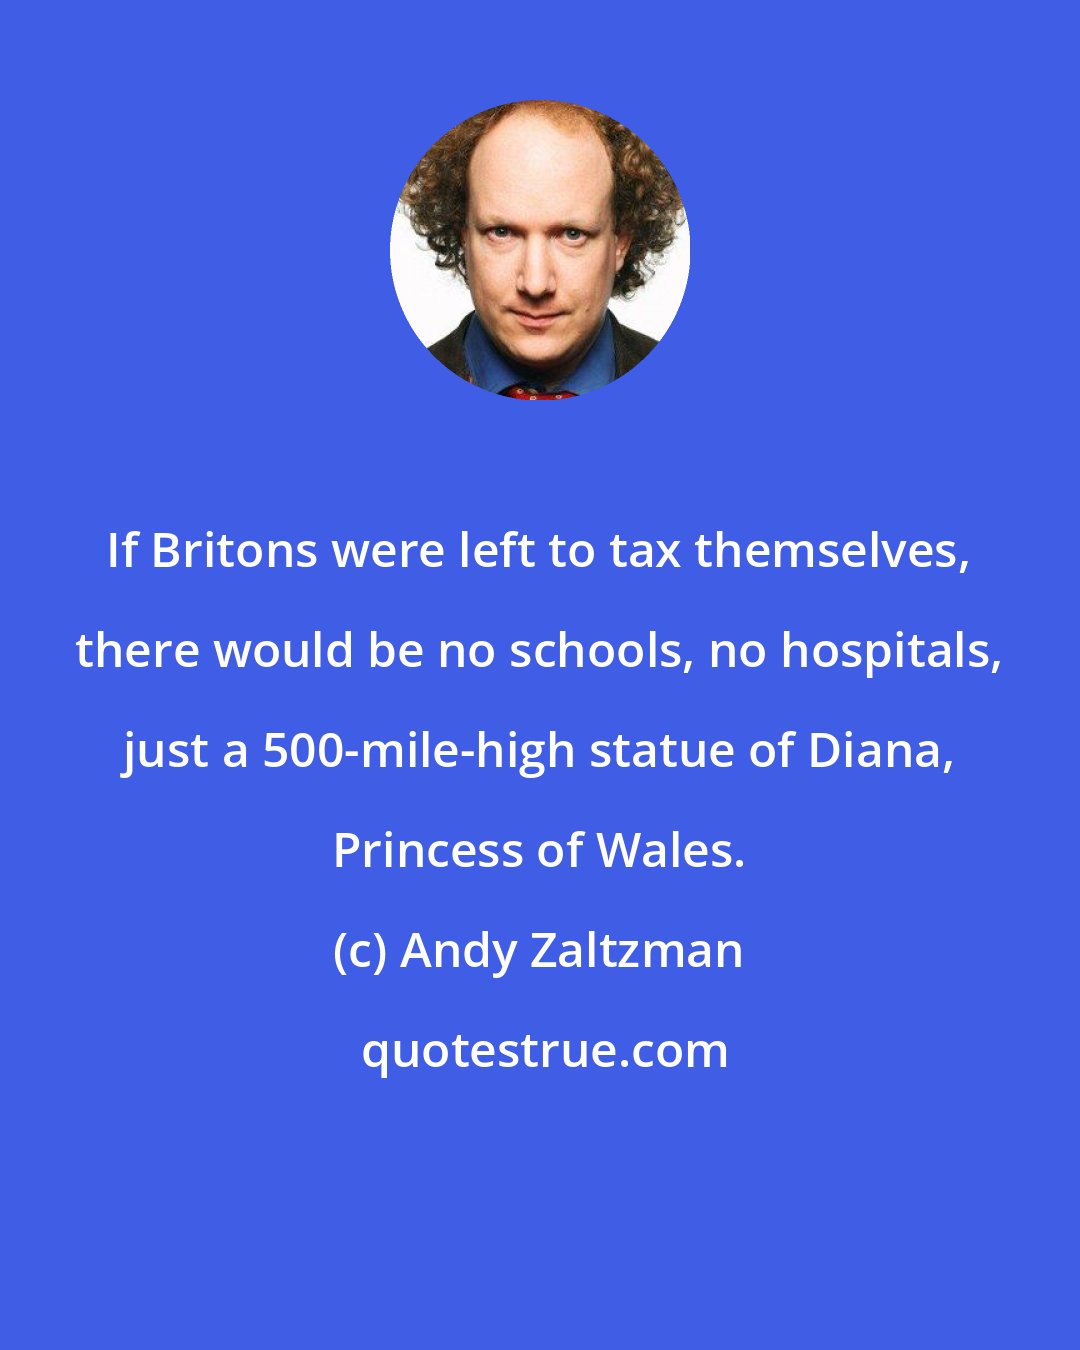 Andy Zaltzman: If Britons were left to tax themselves, there would be no schools, no hospitals, just a 500-mile-high statue of Diana, Princess of Wales.